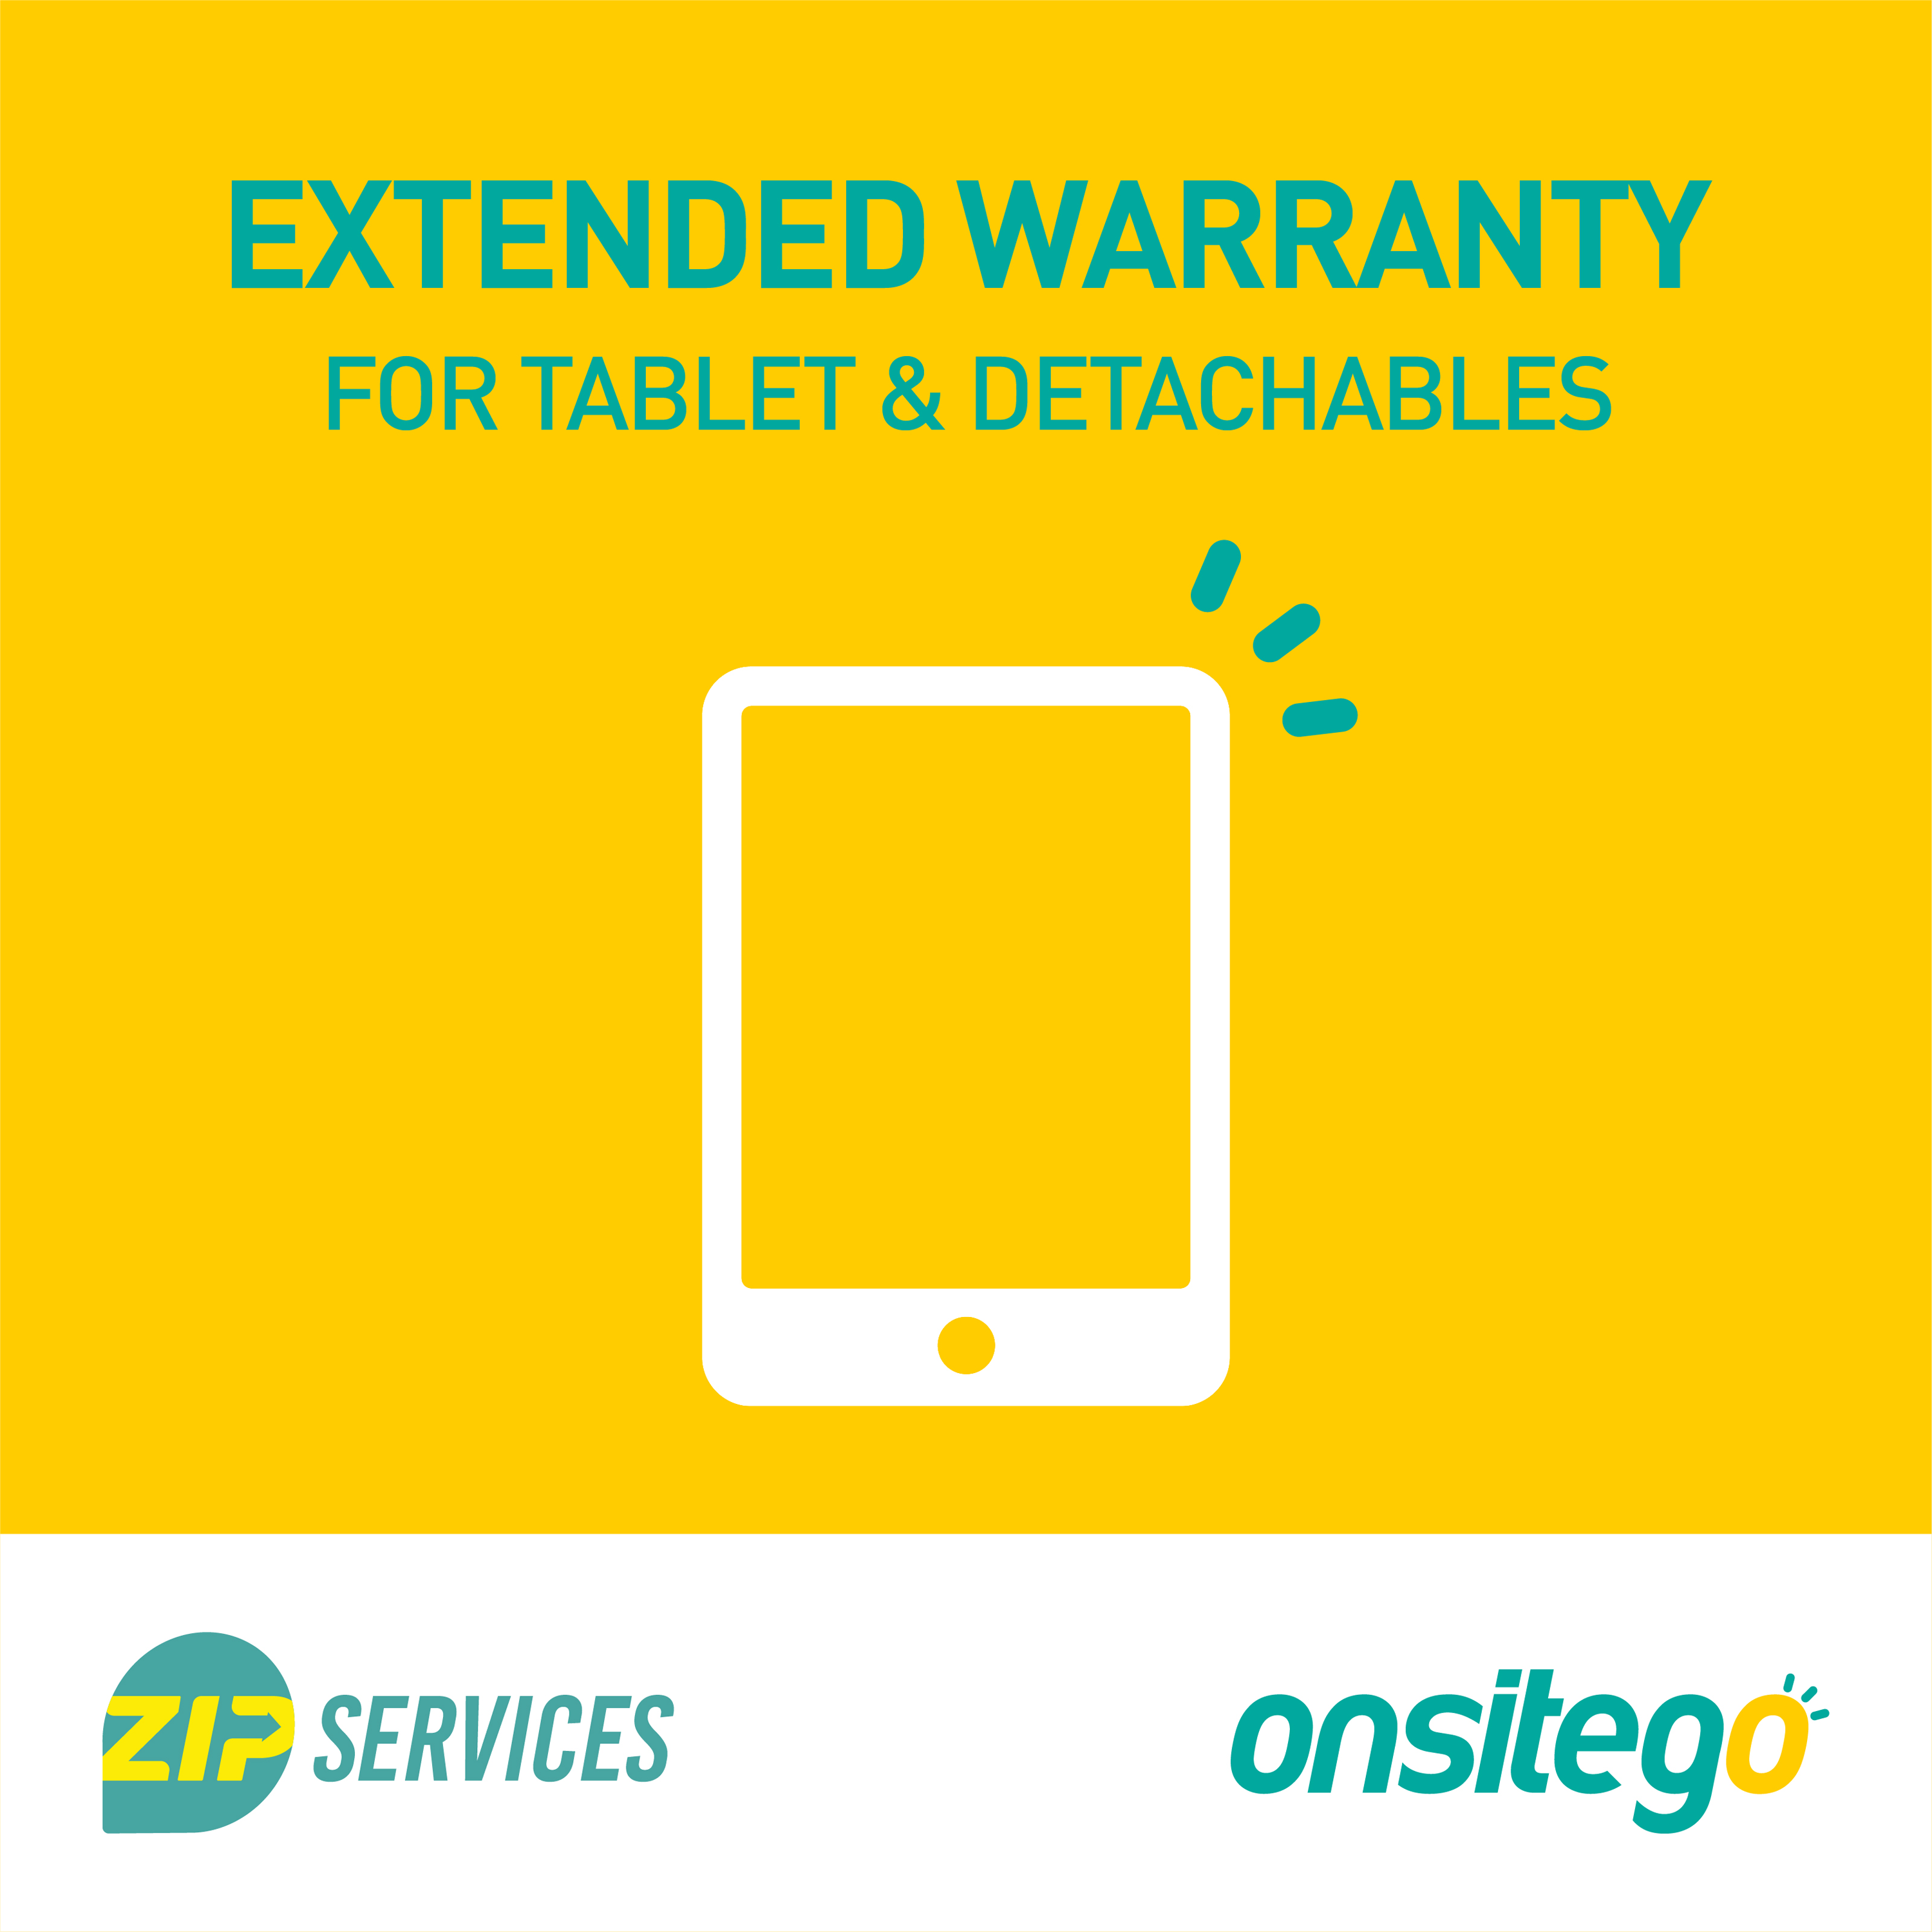 Onsitego 3 Months Extended Warranty for Tablets Rs.120001 - Rs.125000_1